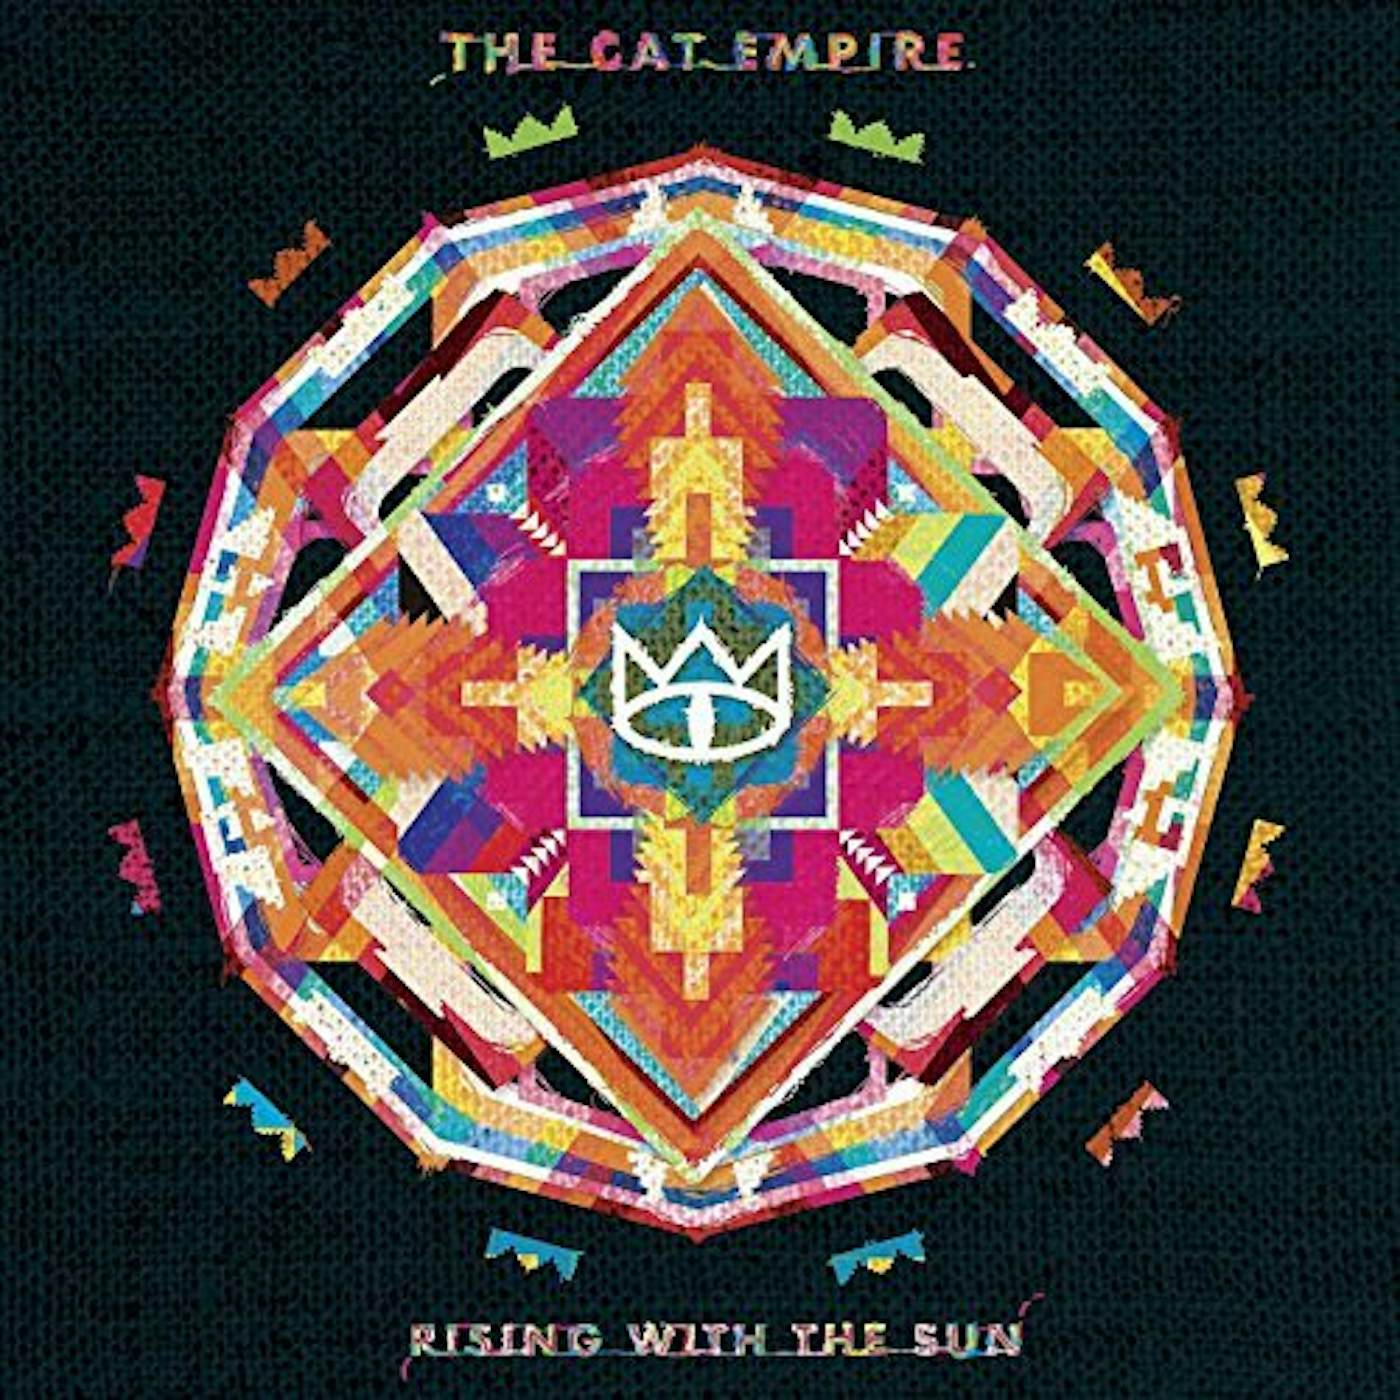 The Cat Empire RISING WITH THE SUN CD